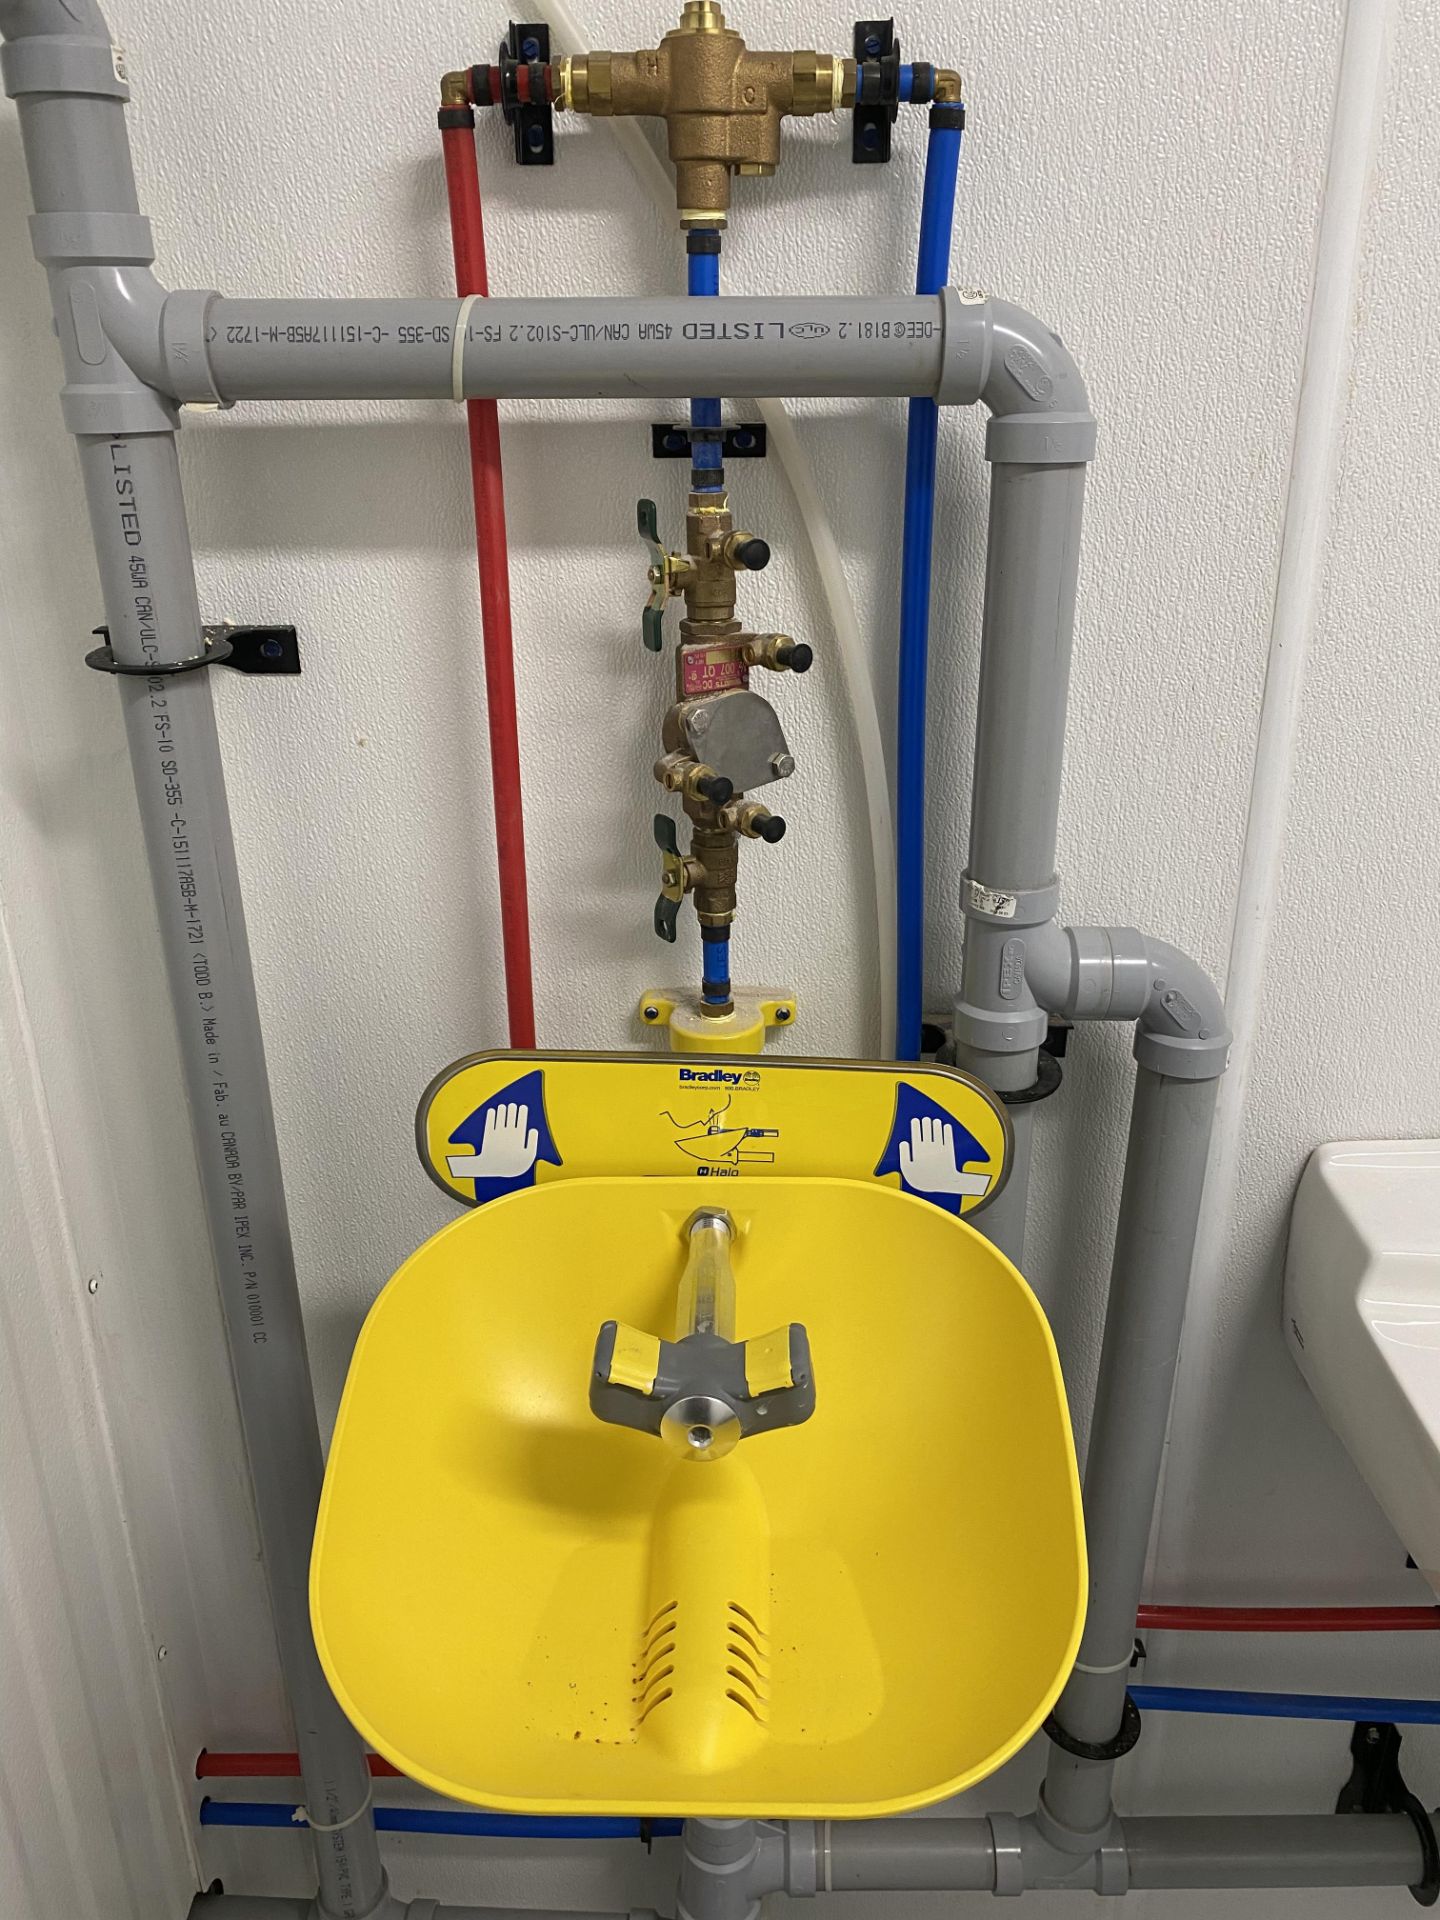 EYE WASH STATION WITH BACK FLOW PREVENTER AND MIXER VALVE